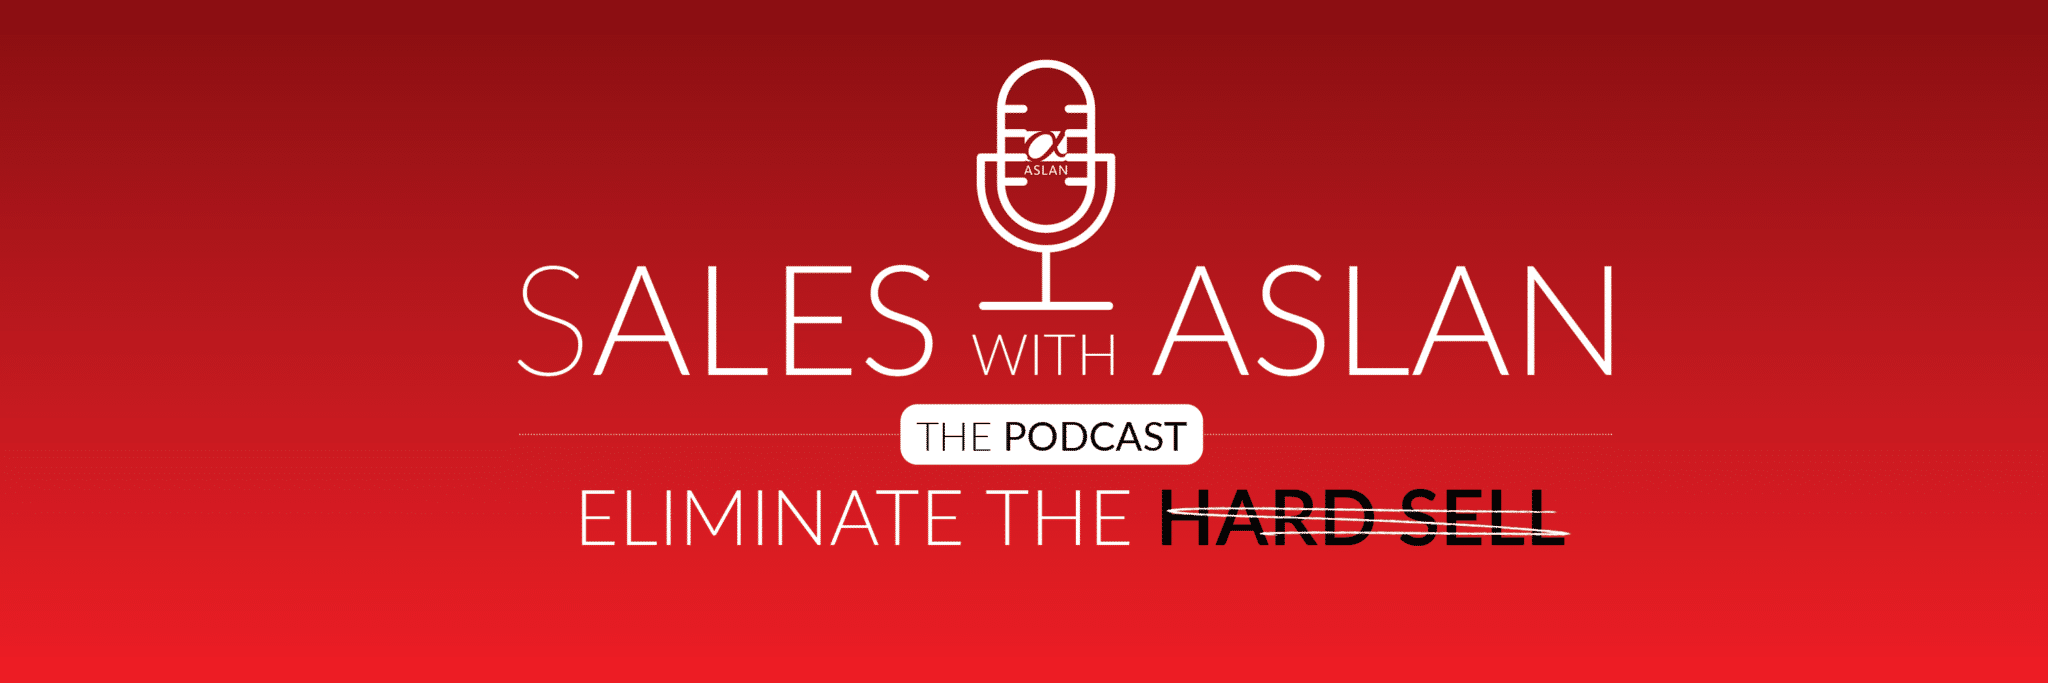 In this episode, Chris White joins Tom and Tab again to continue their discussion about his best-selling book and share the habits that make or break our success when making a technical sale.